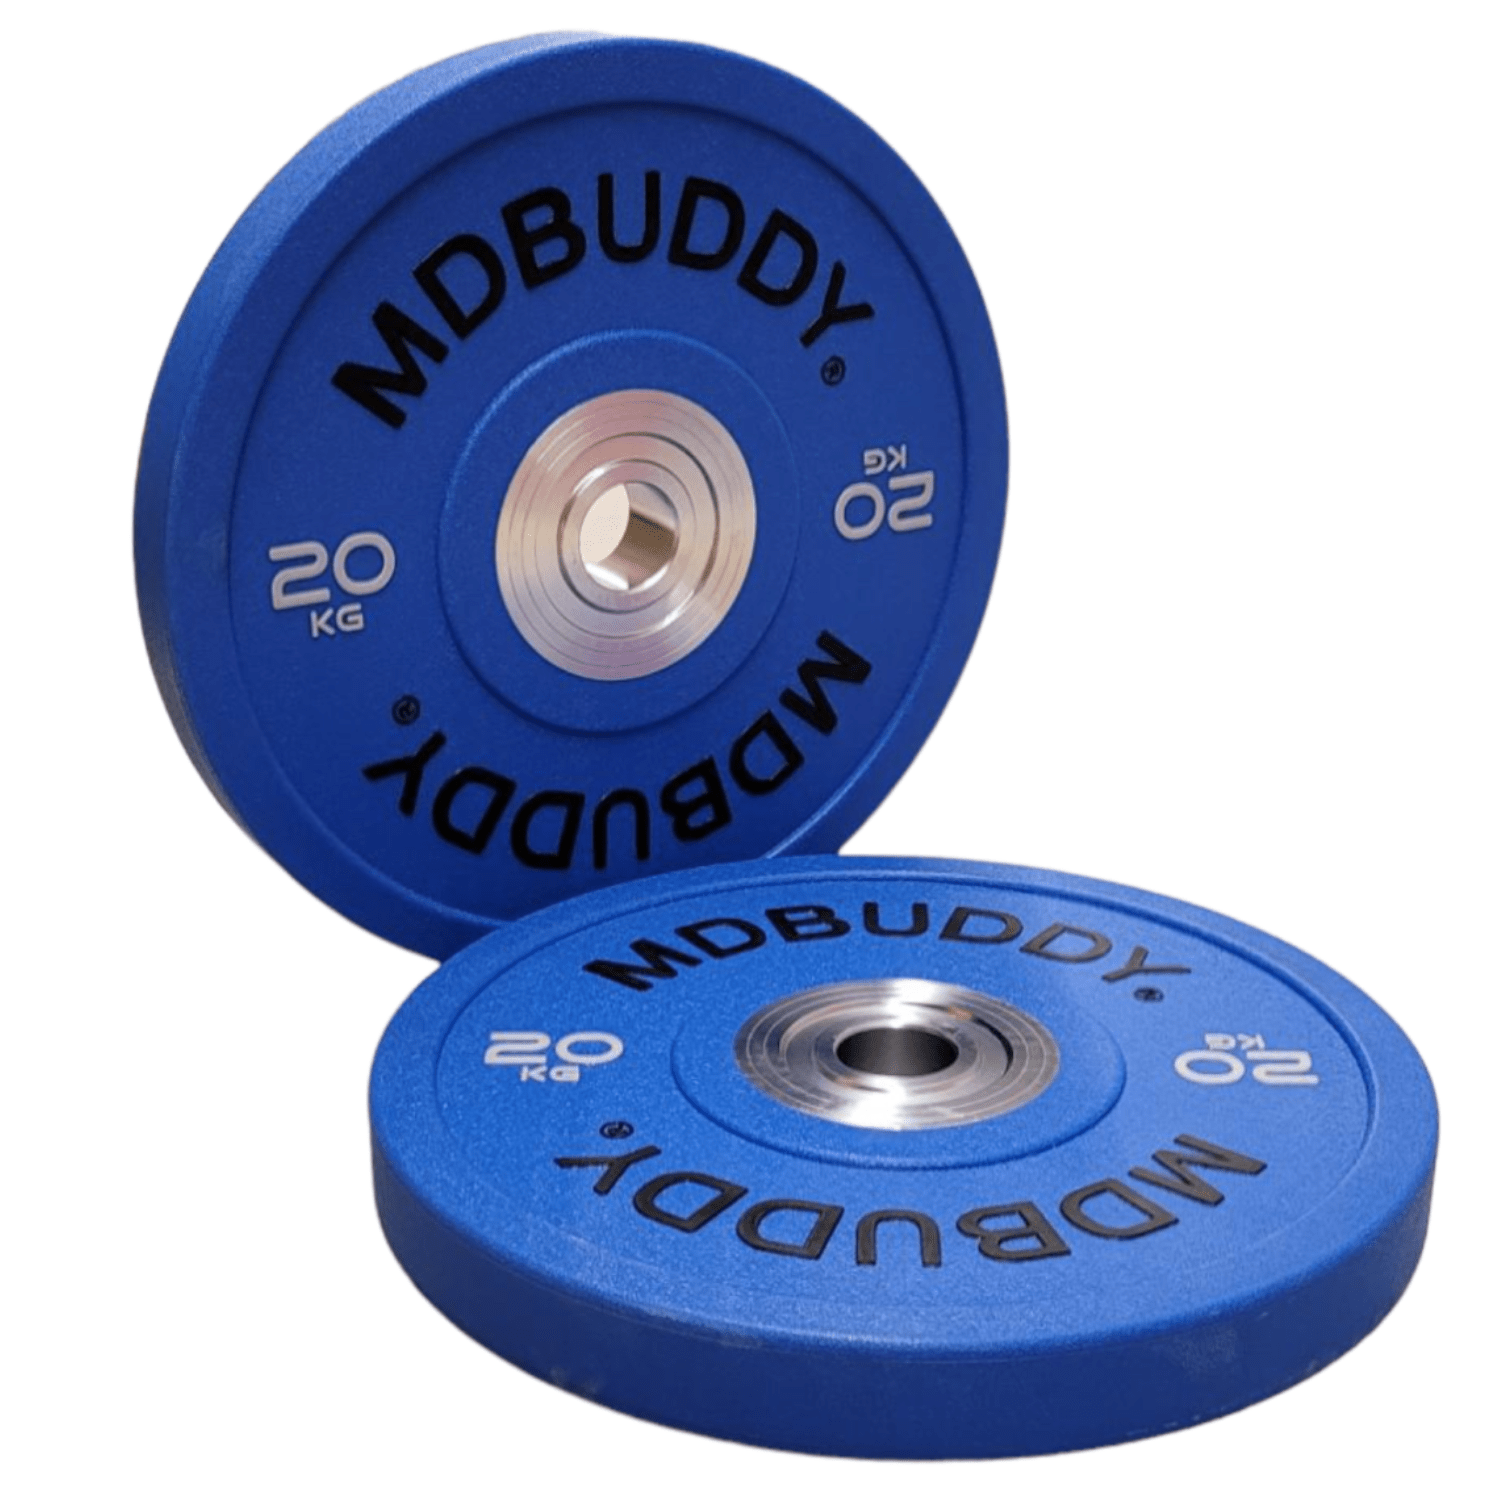 MD Buddy Commercial Urethane Competition Bumper Plate-Urethane Bumper-Flaman Fitness-4